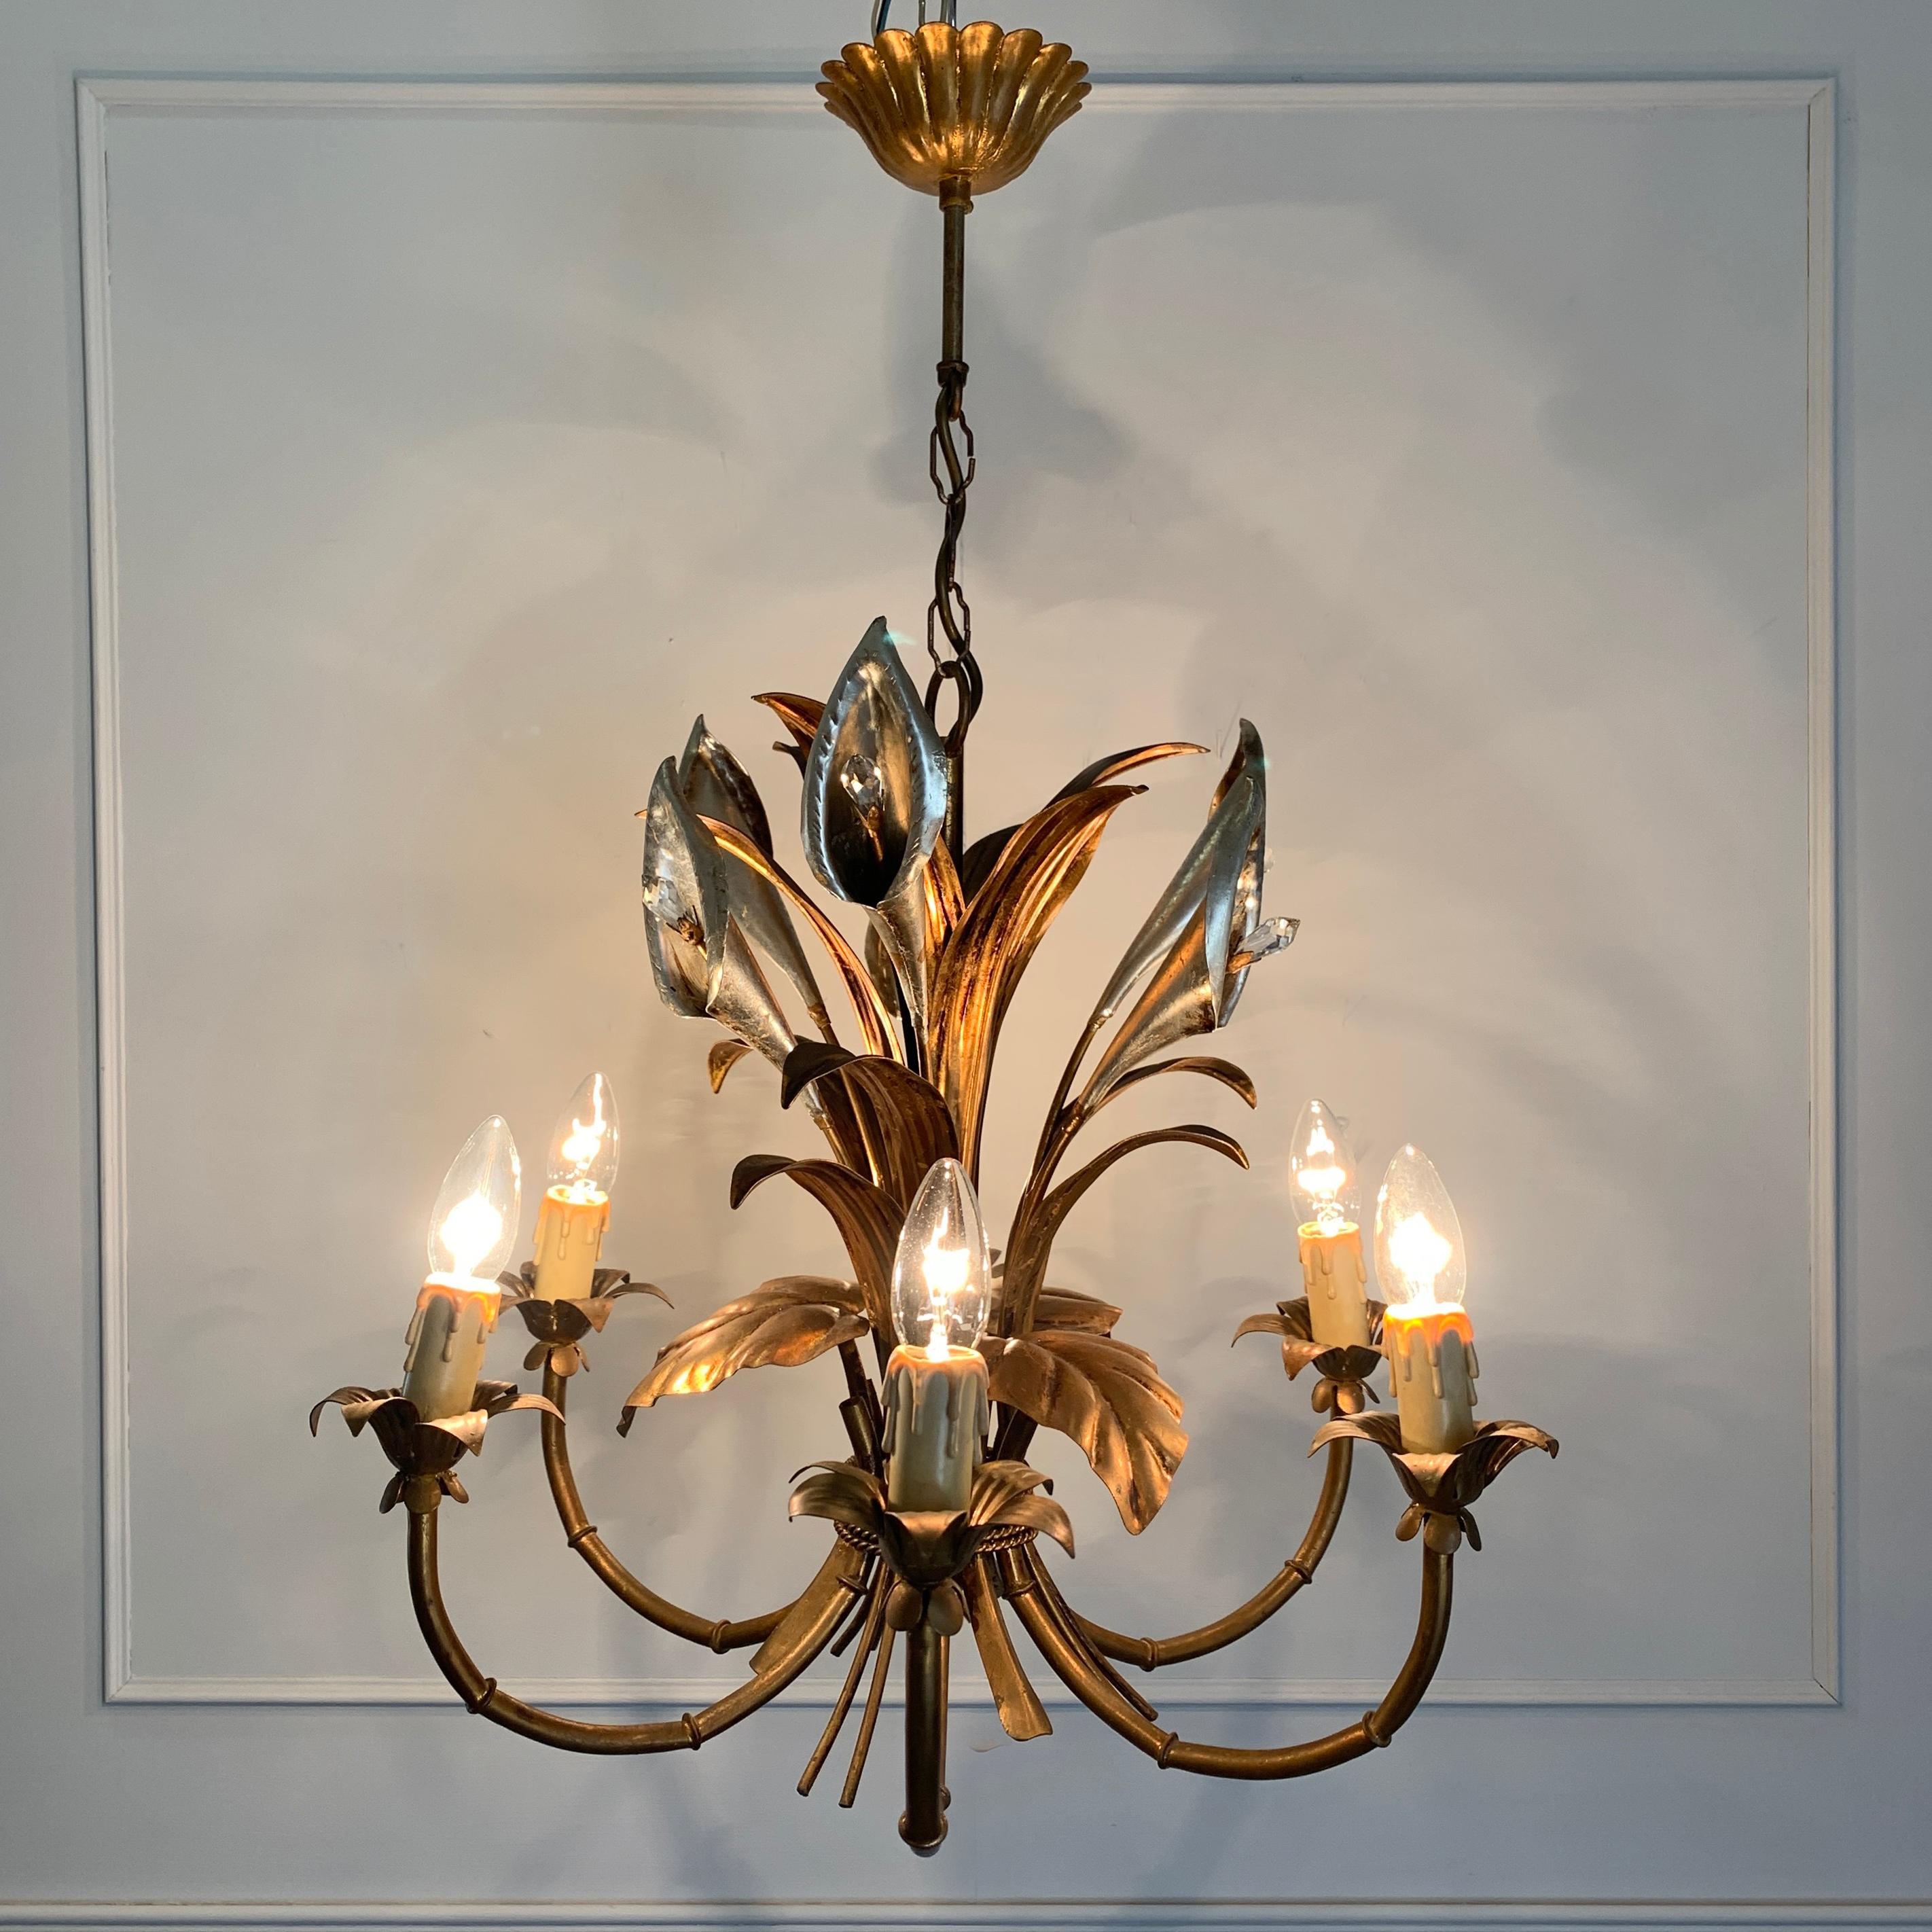 Hans Kögl Gold and Silver Calla Lily Chandelier 1970’s For Sale 1